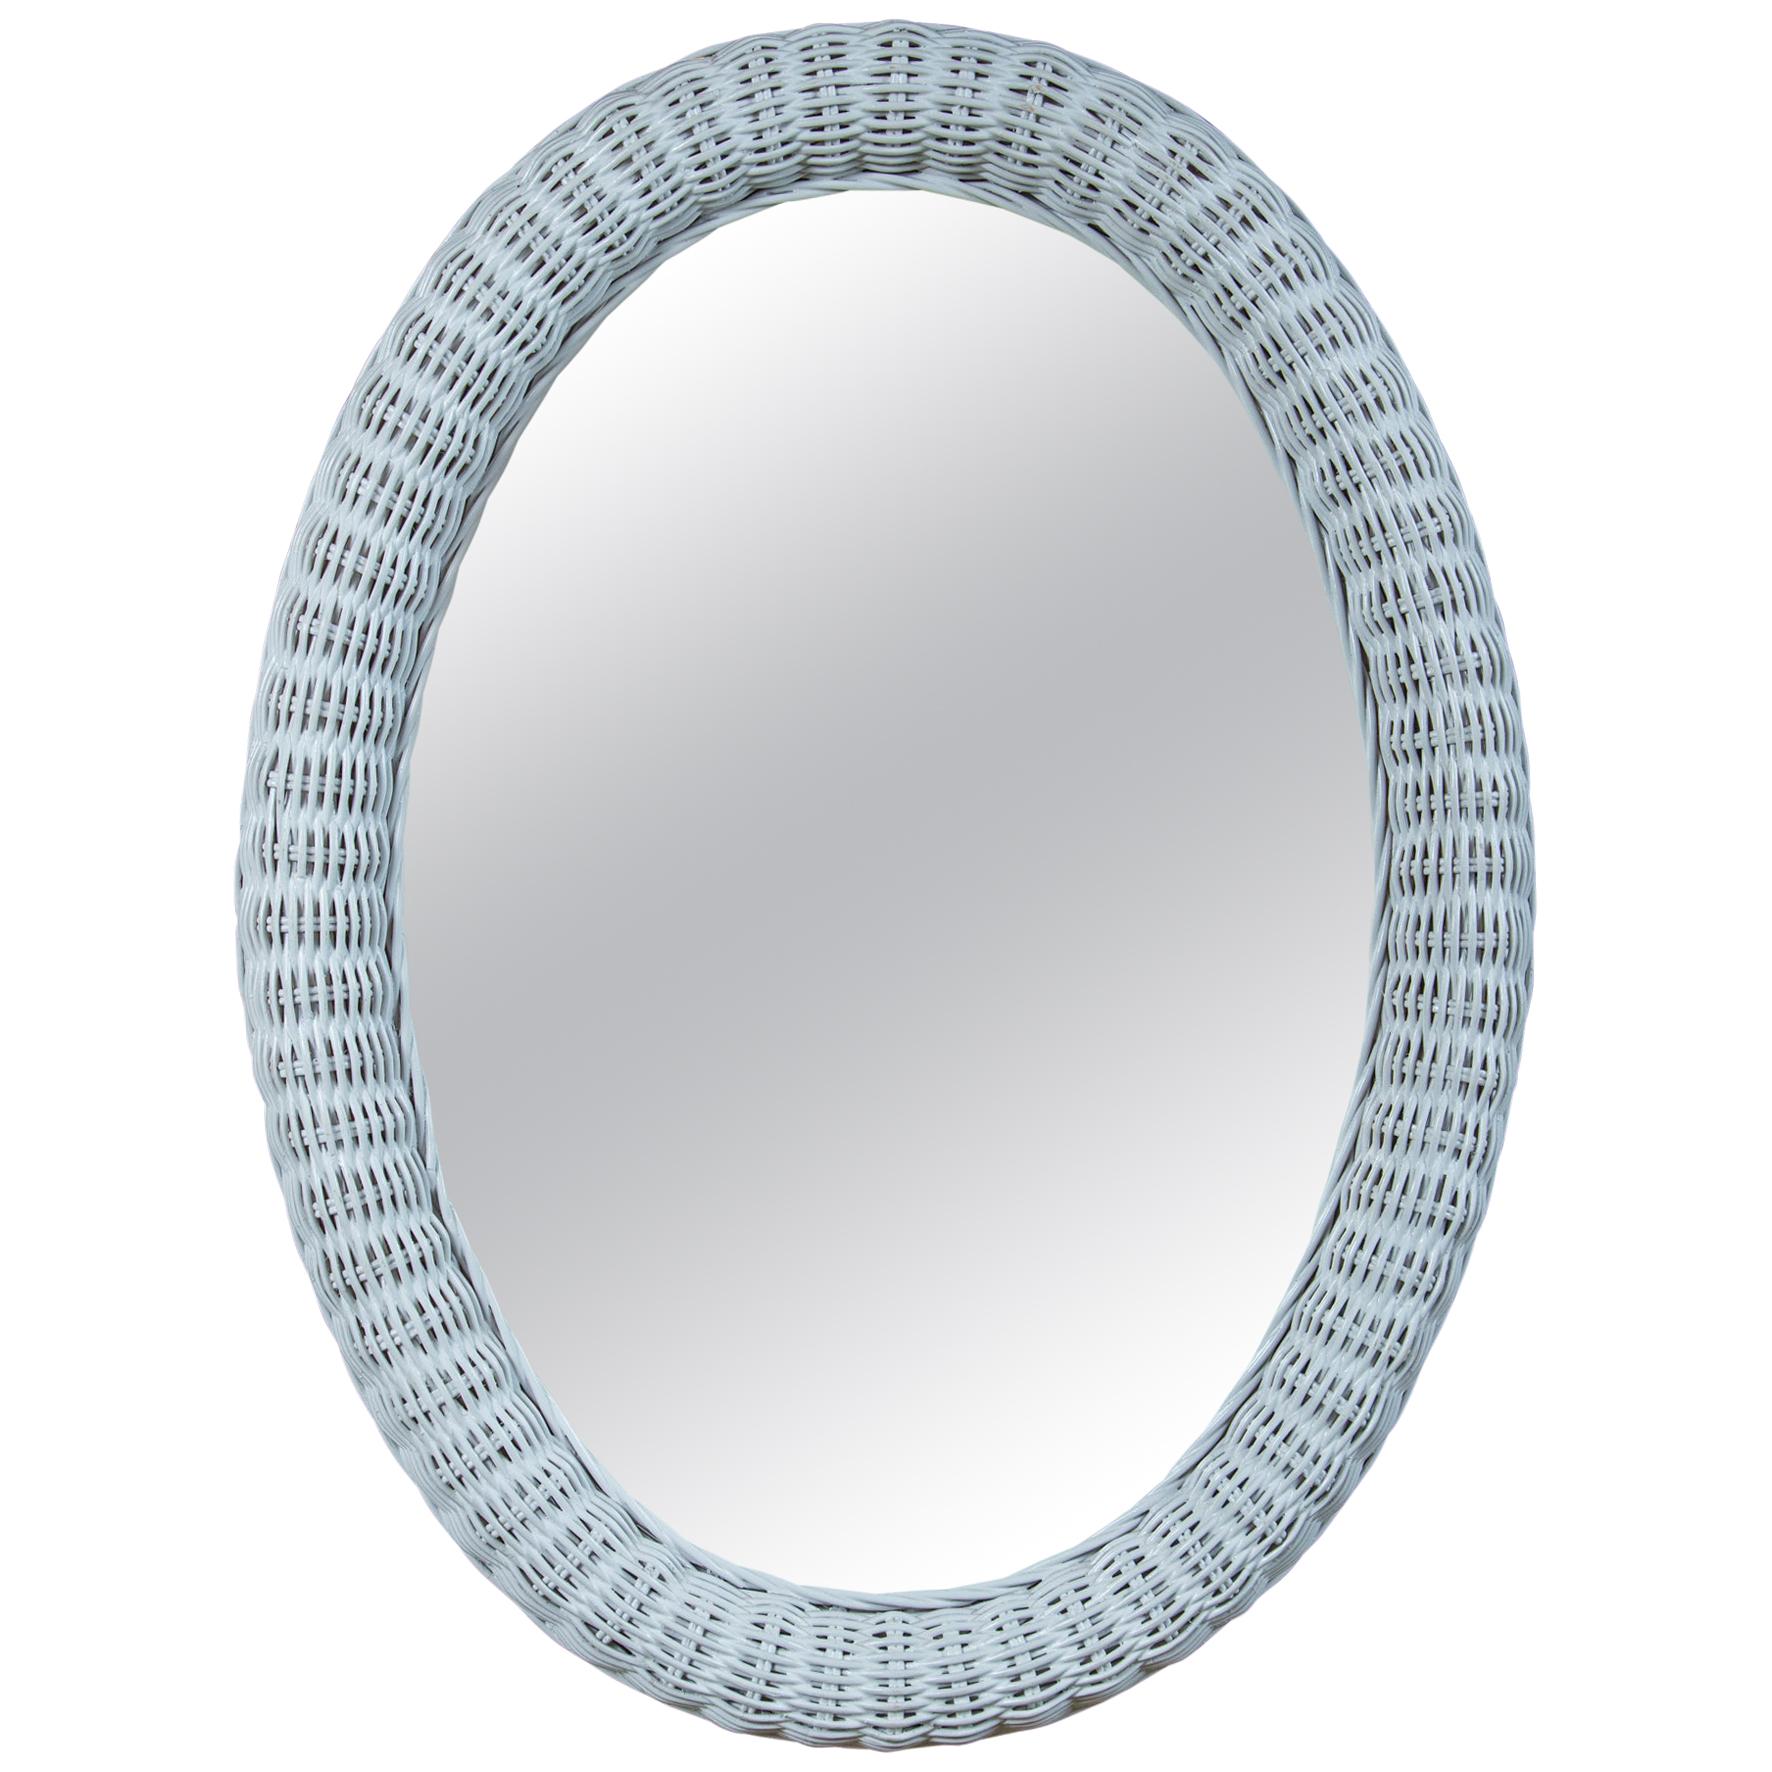 Large Vintage Oval Wicker Mirror For Sale